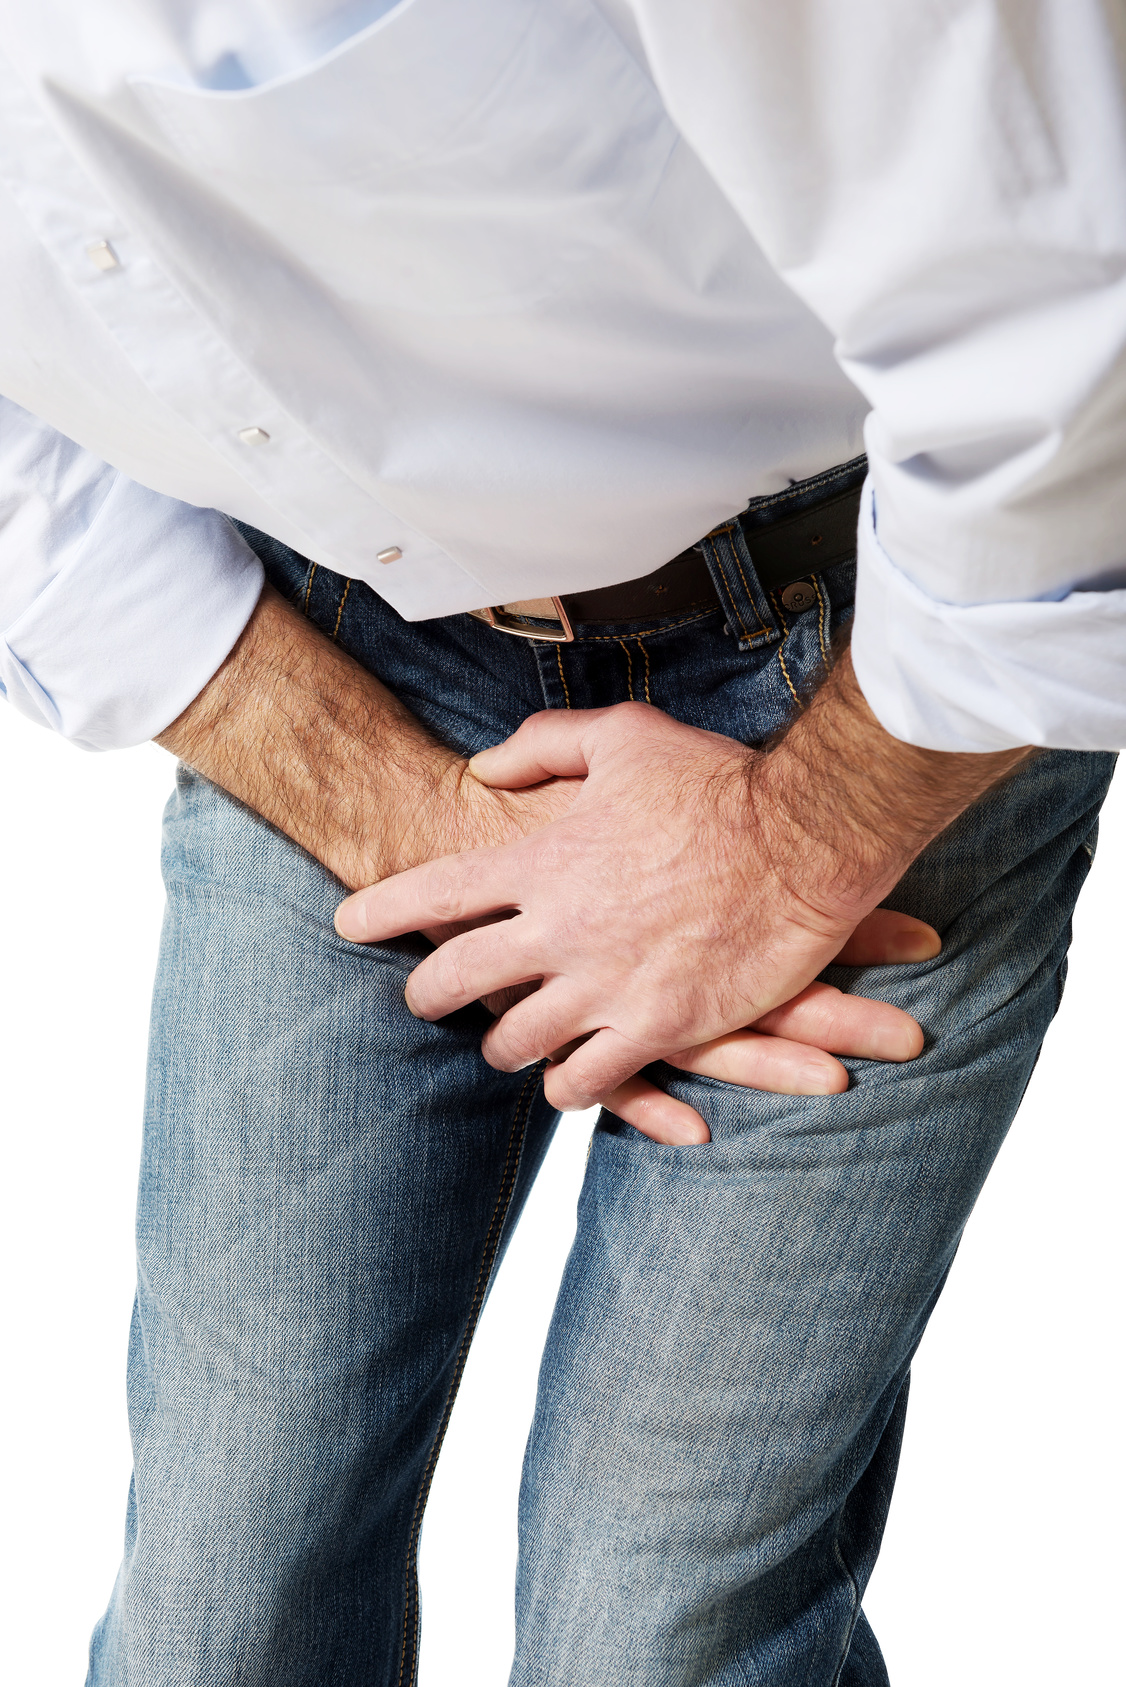 Hurt my intercourse testicles after Testicular pain: